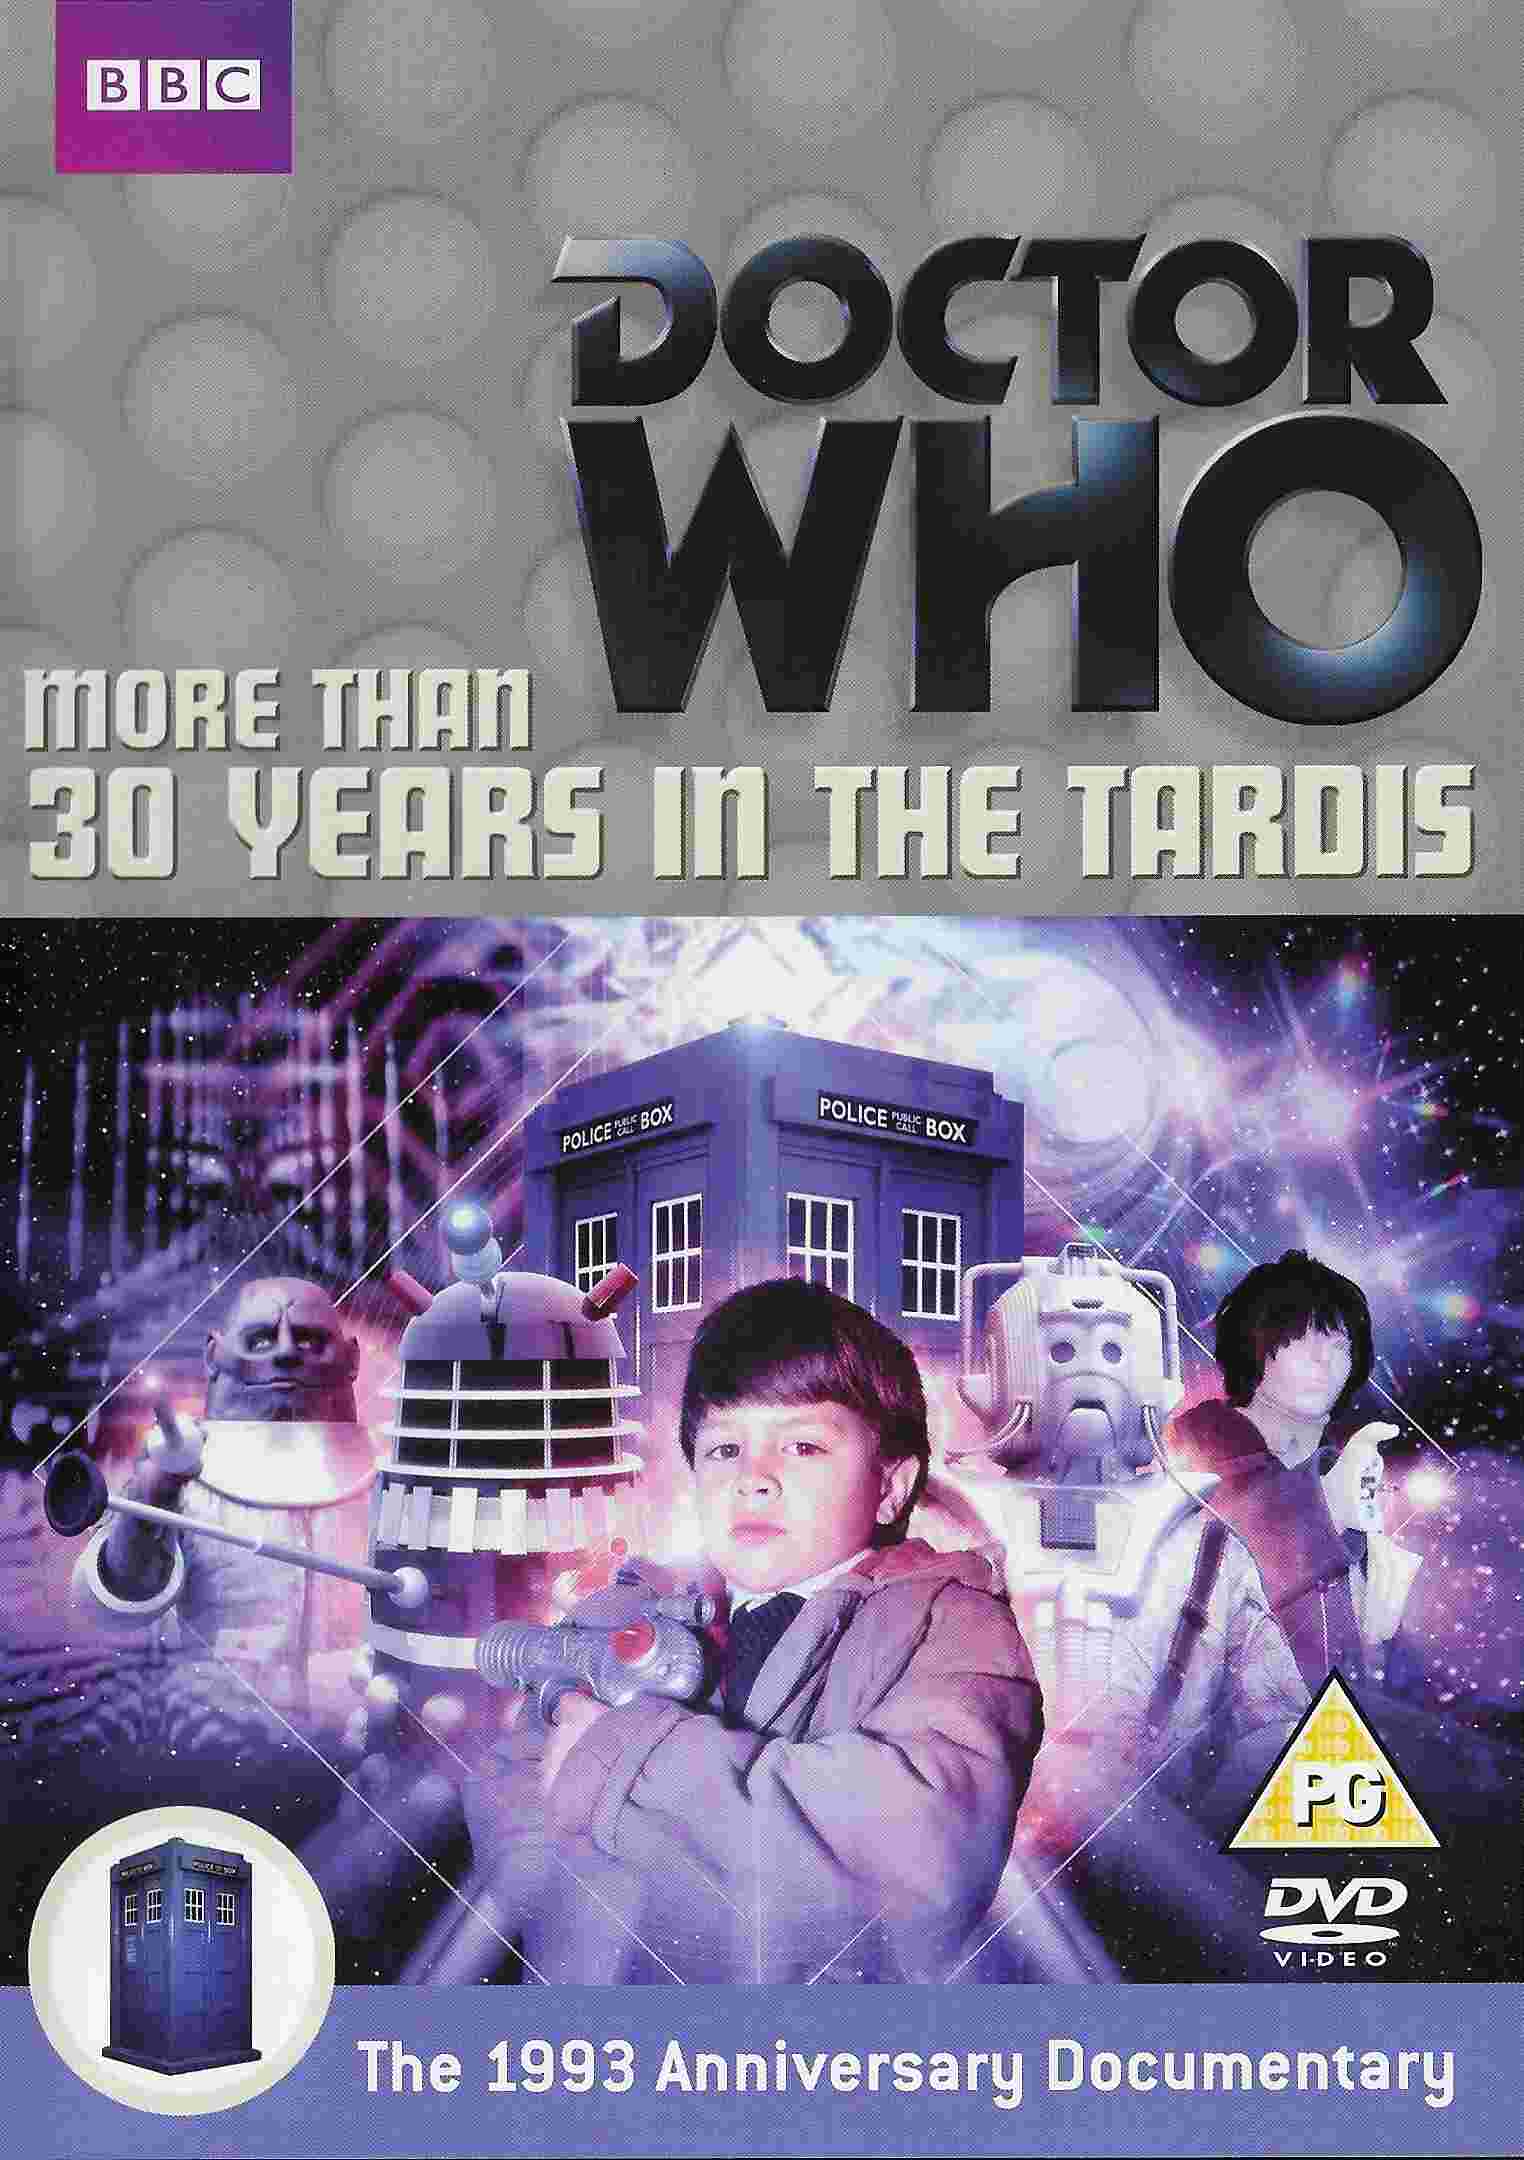 Picture of BBCDVD 3388B Doctor Who - More than 30 years in the TARDIS by artist Various from the BBC dvds - Records and Tapes library